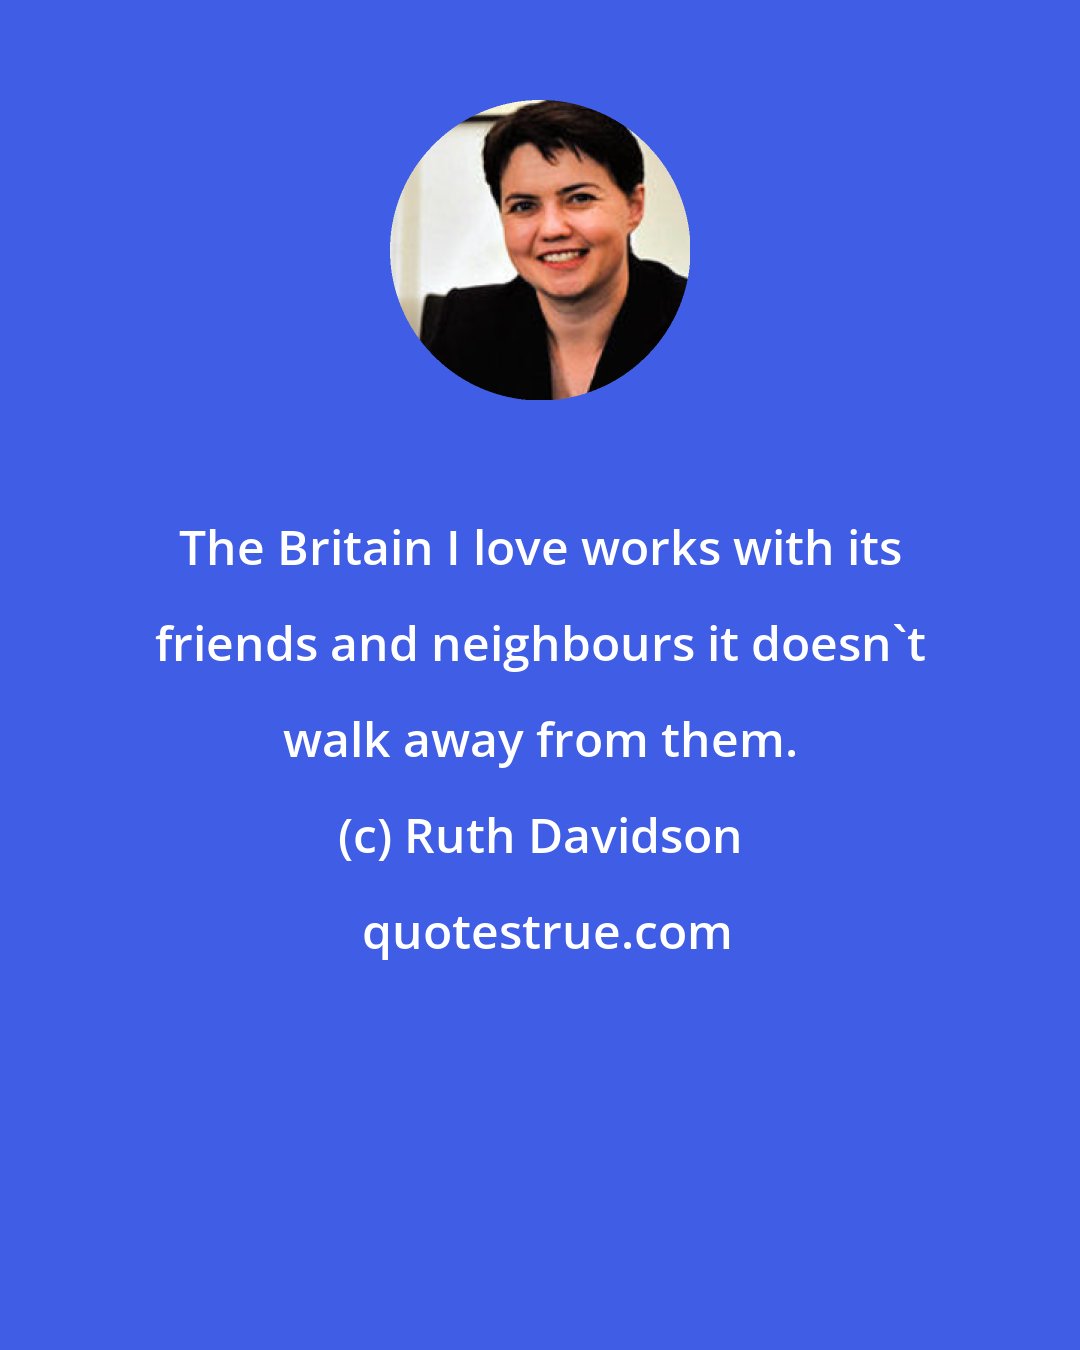 Ruth Davidson: The Britain I love works with its friends and neighbours it doesn't walk away from them.